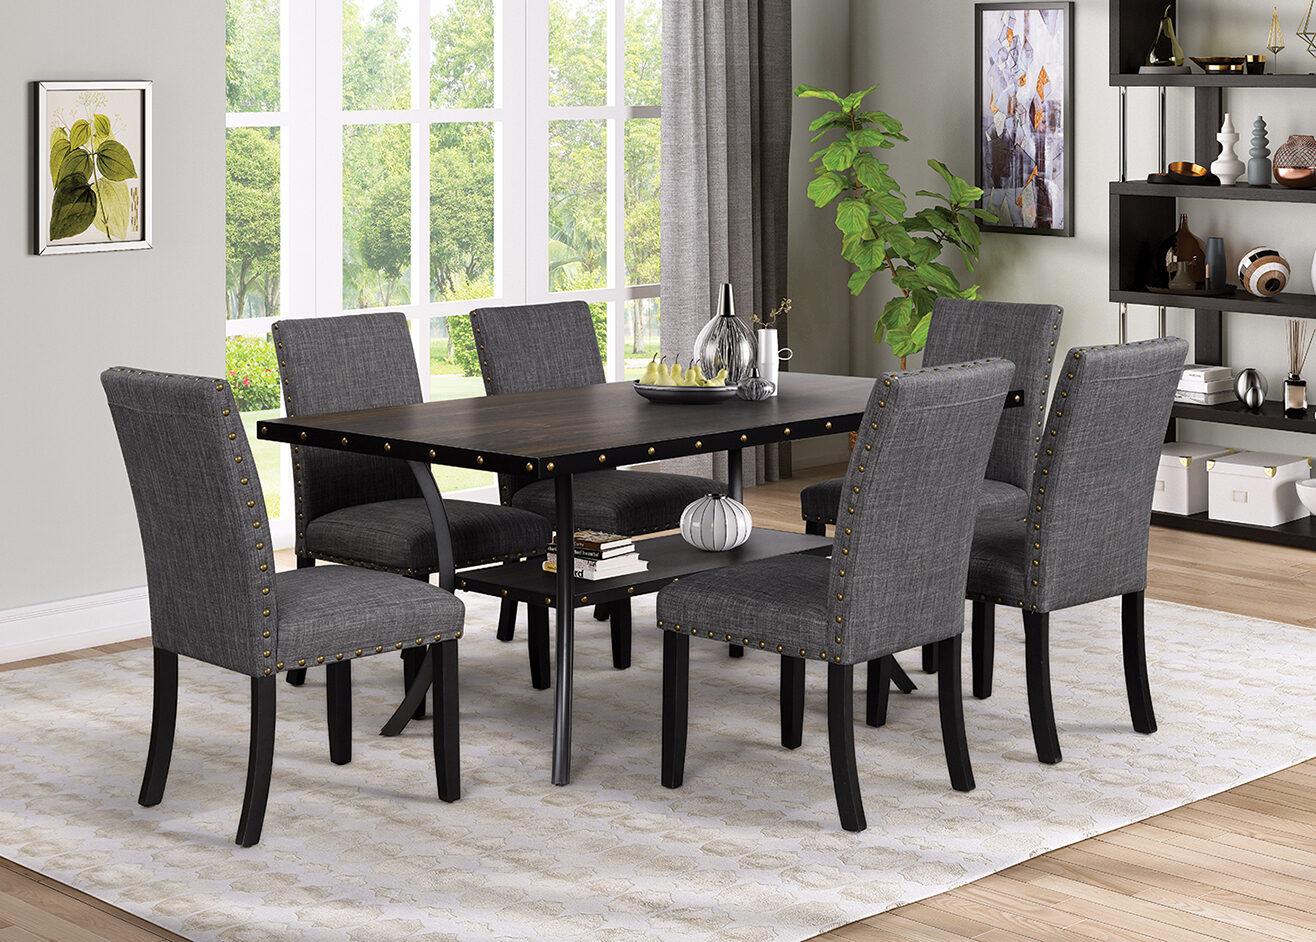 Gaucho, 5 Piece Dining Set With Gray Chairs,Mainline